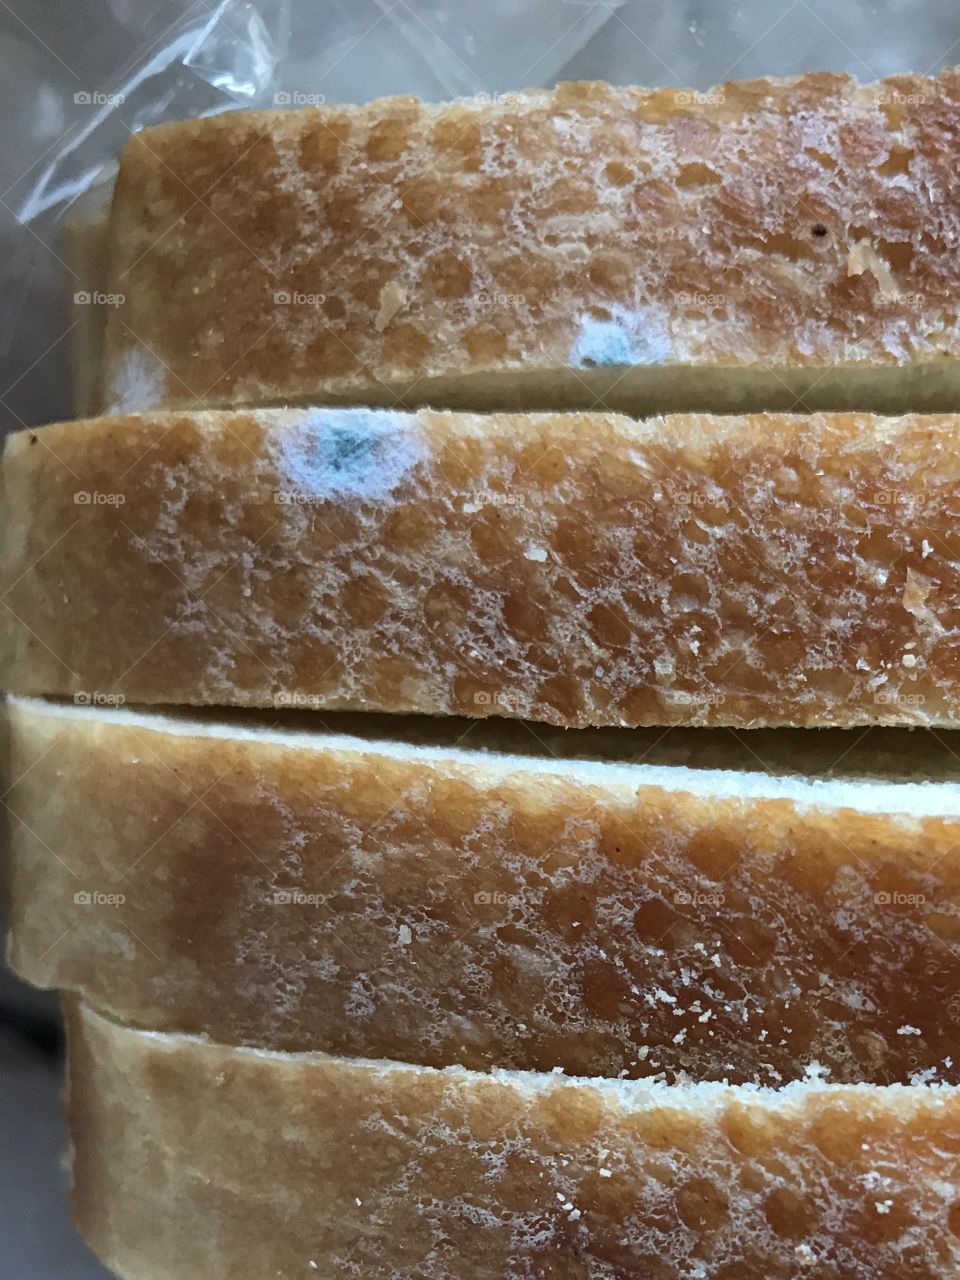 Bread with a slight amount of mold